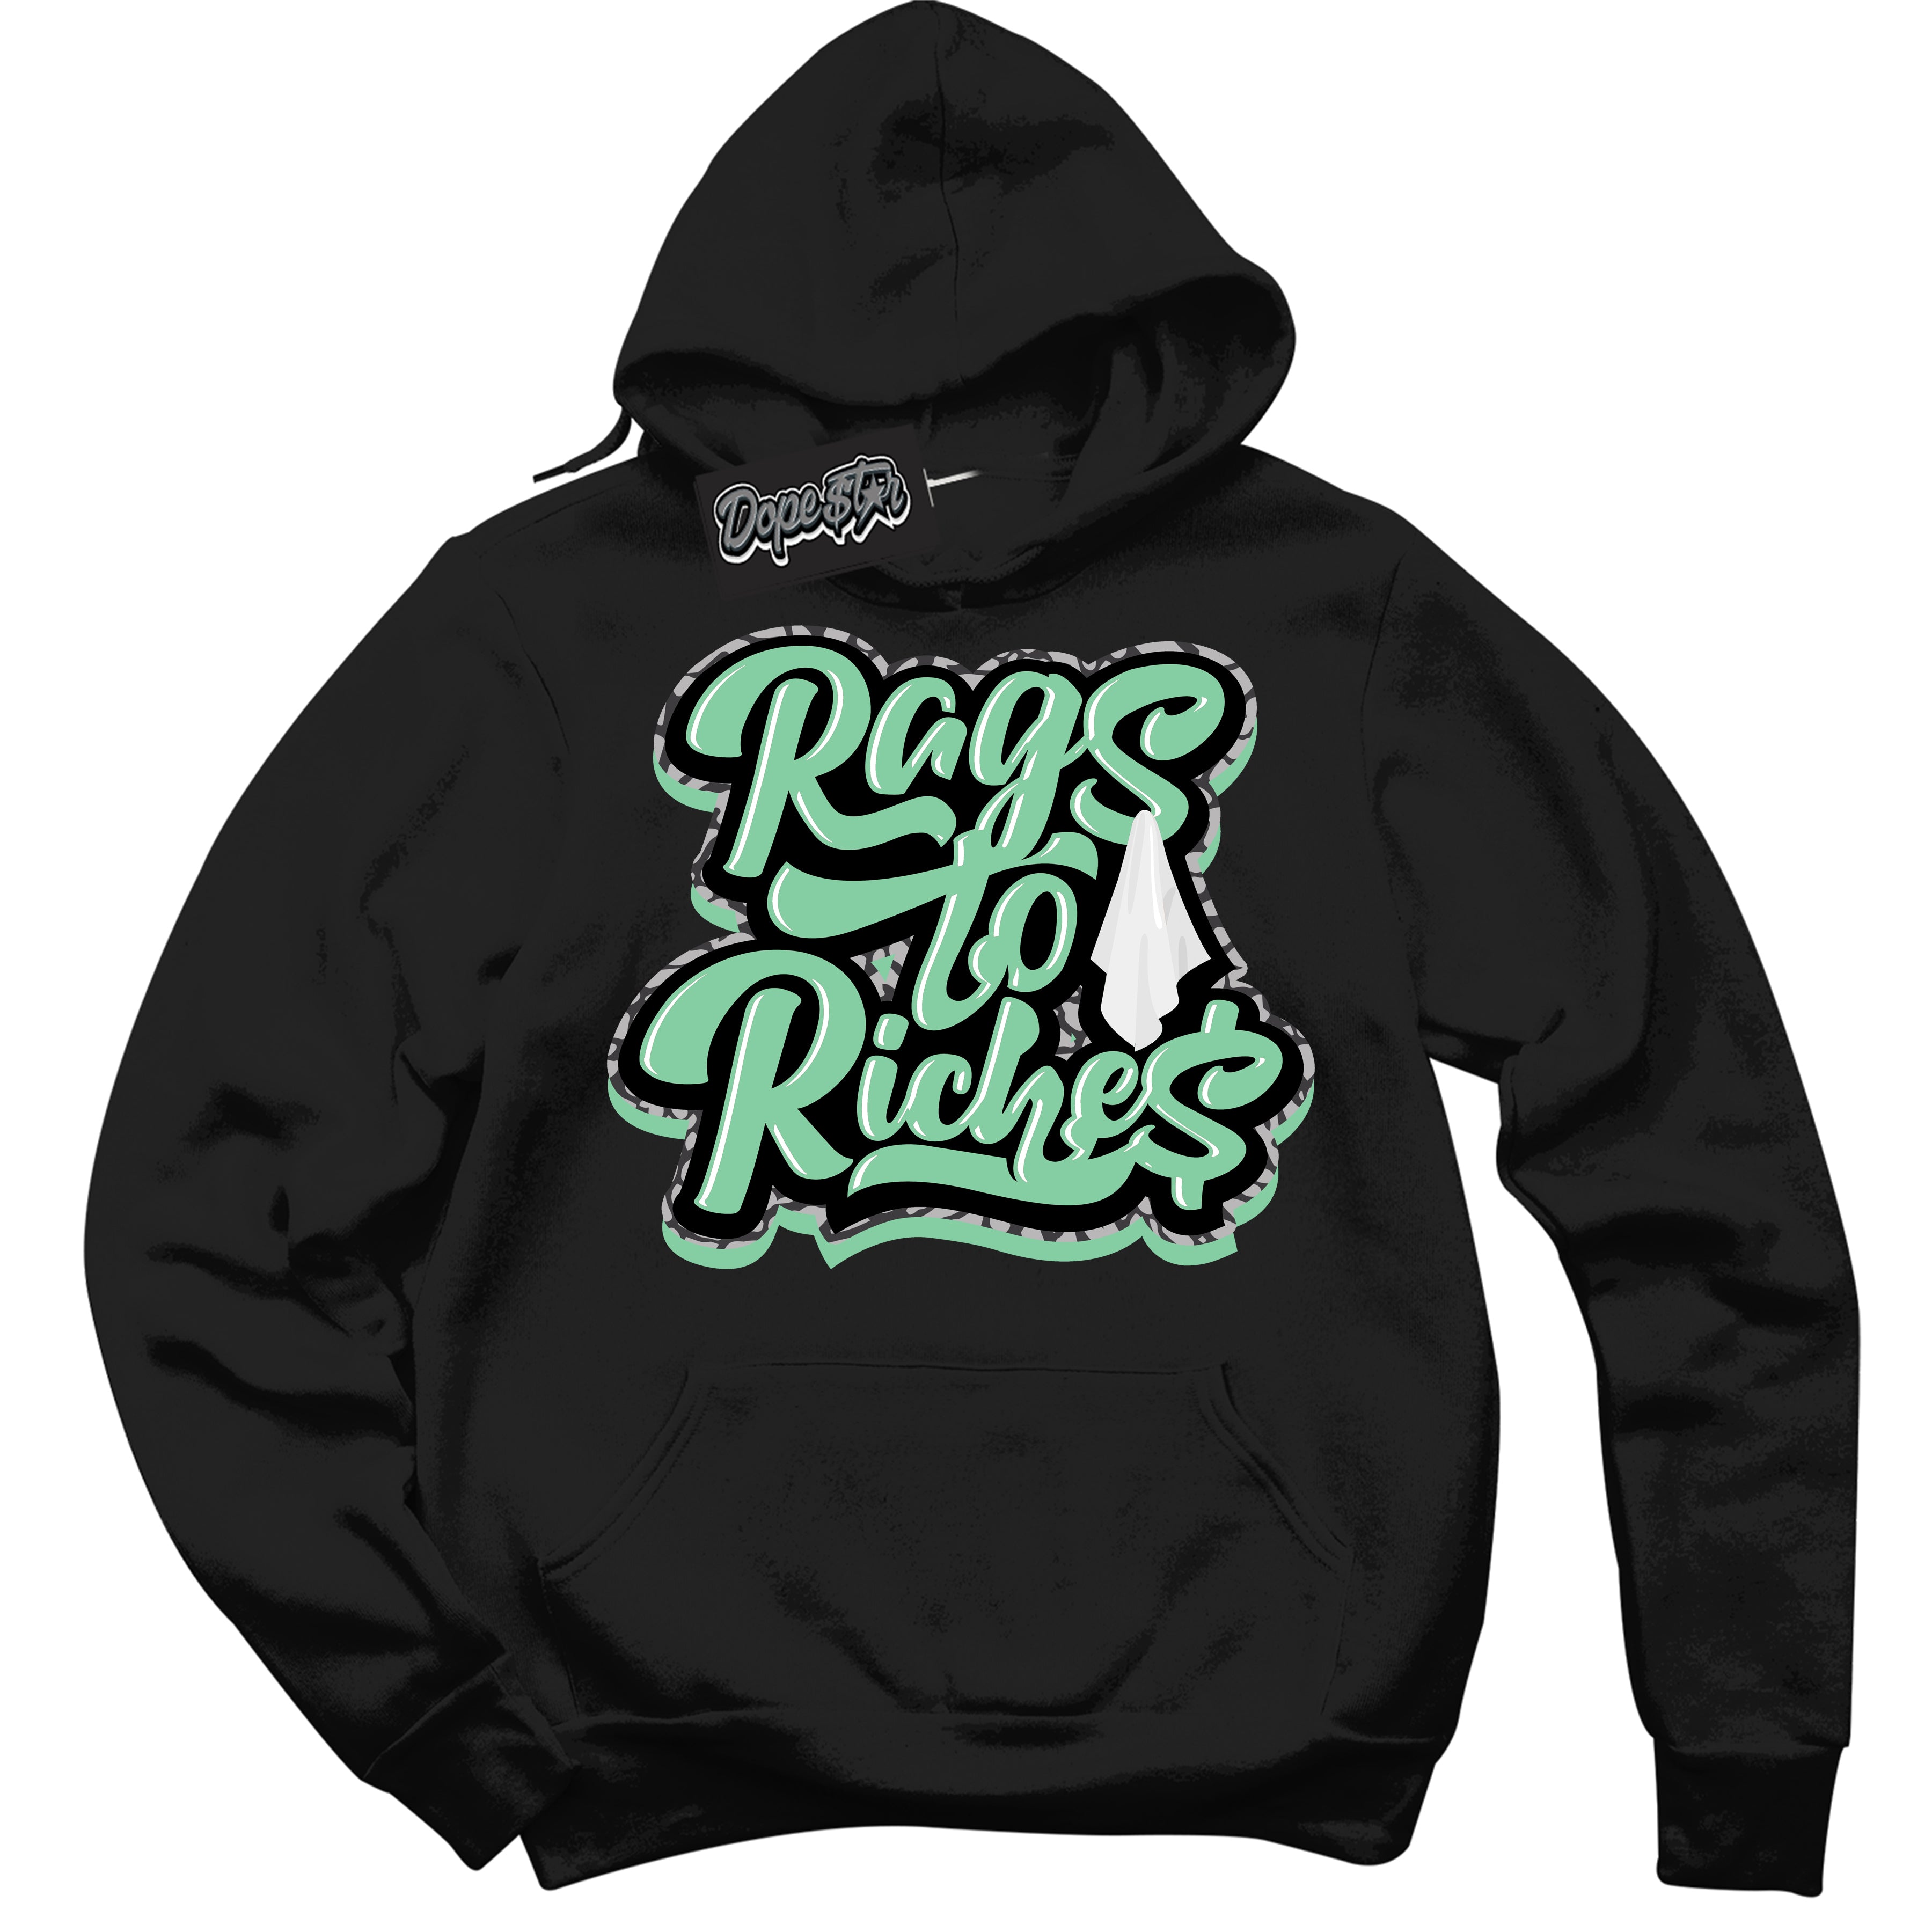 Cool Black Graphic DopeStar Hoodie with “ Rags To Riches “ print, that perfectly matches Green Glow 3S sneakers